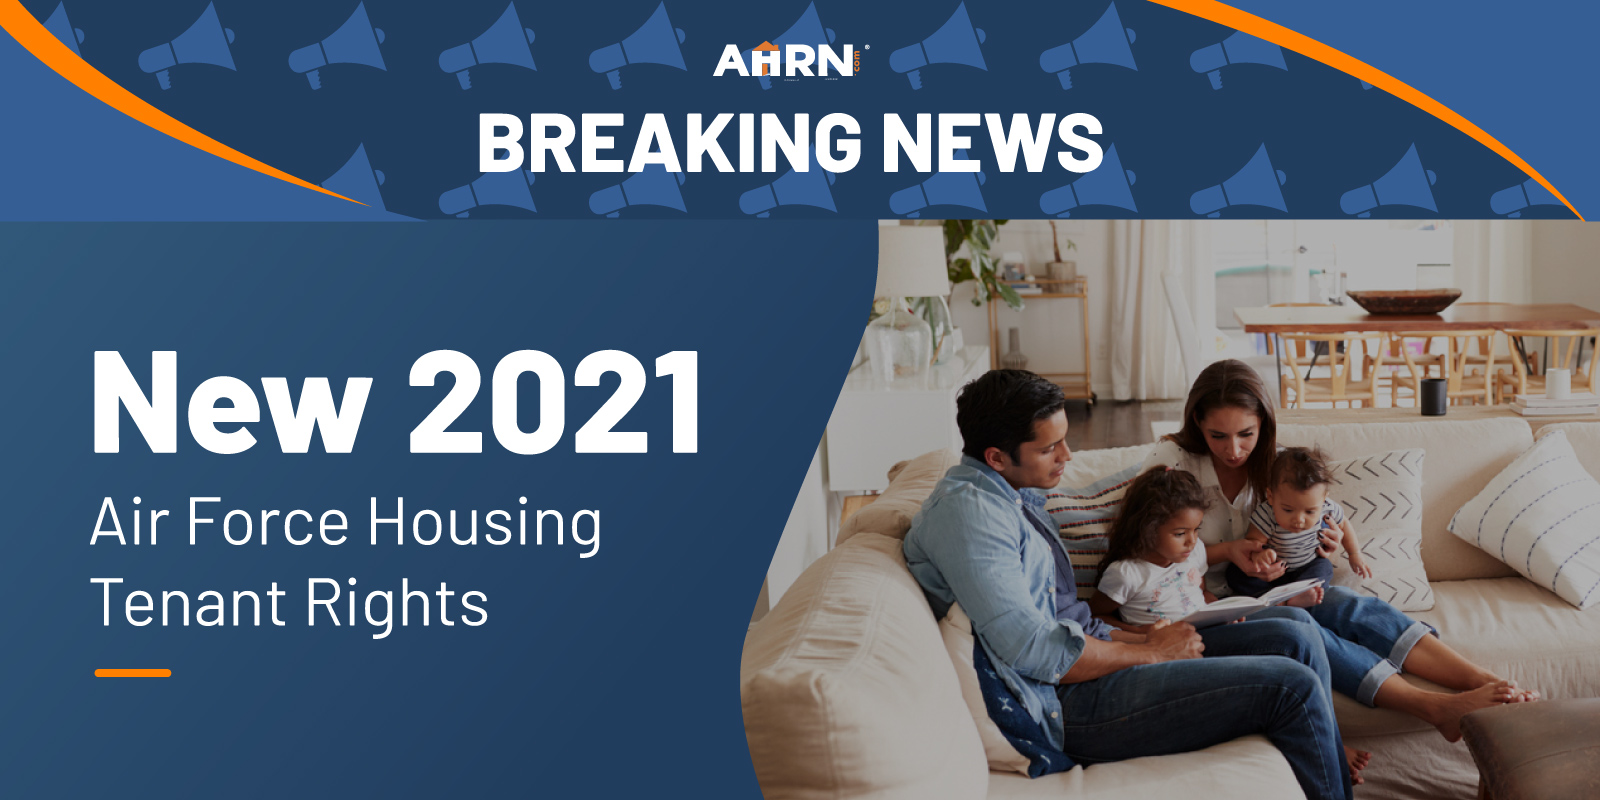 NEW 2021 Air Force Housing Tenant Rights - What You Need to Know!